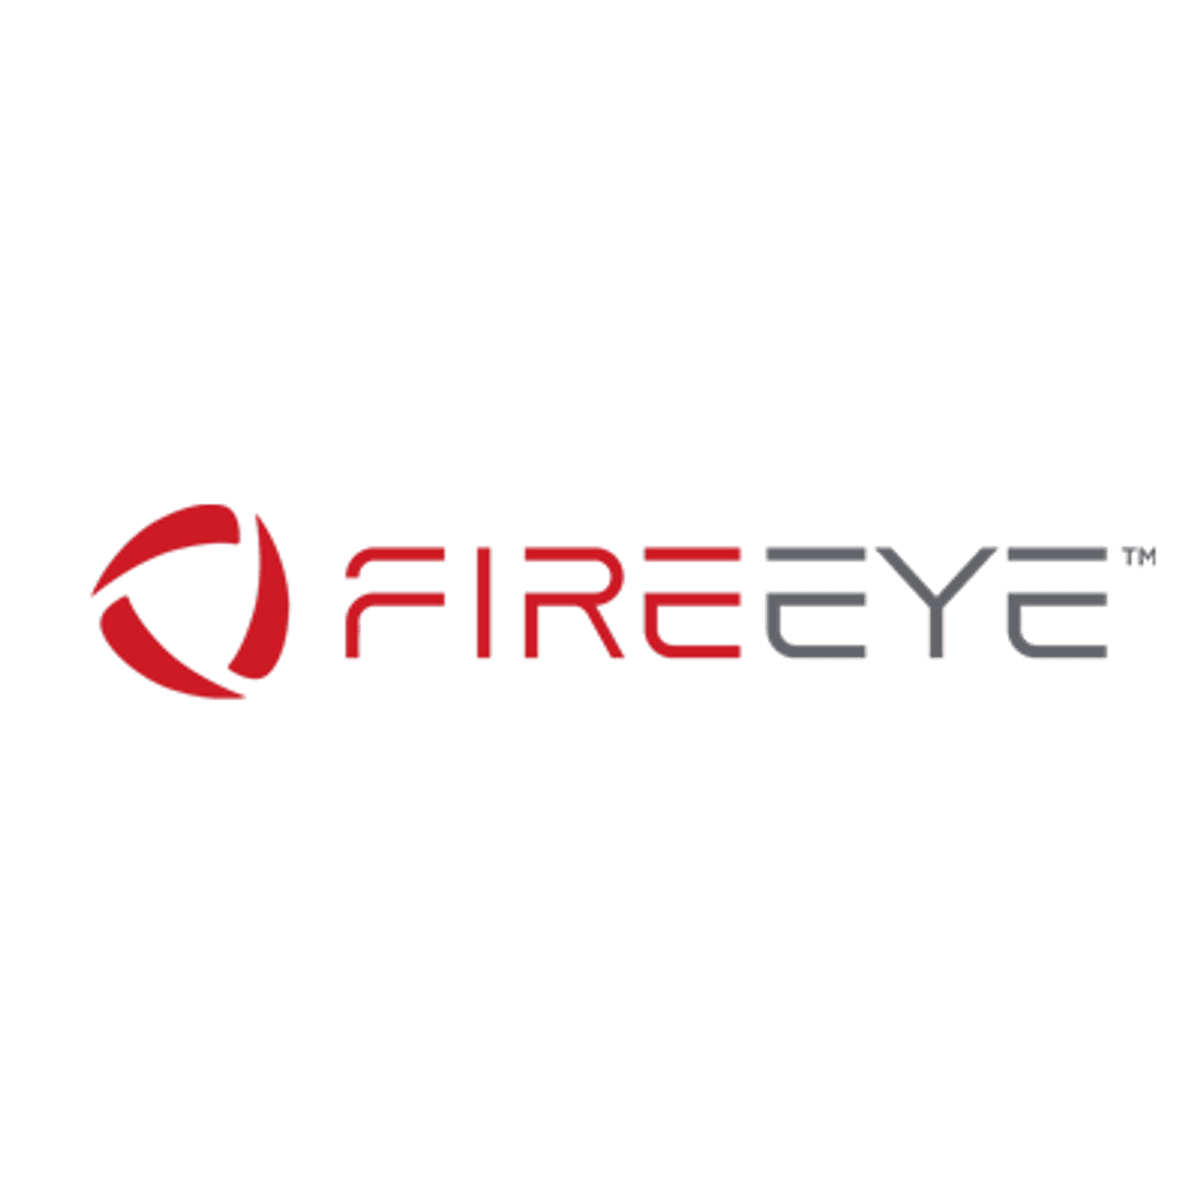 FireEye Products Business verkocht aan Symphony Technology Group image